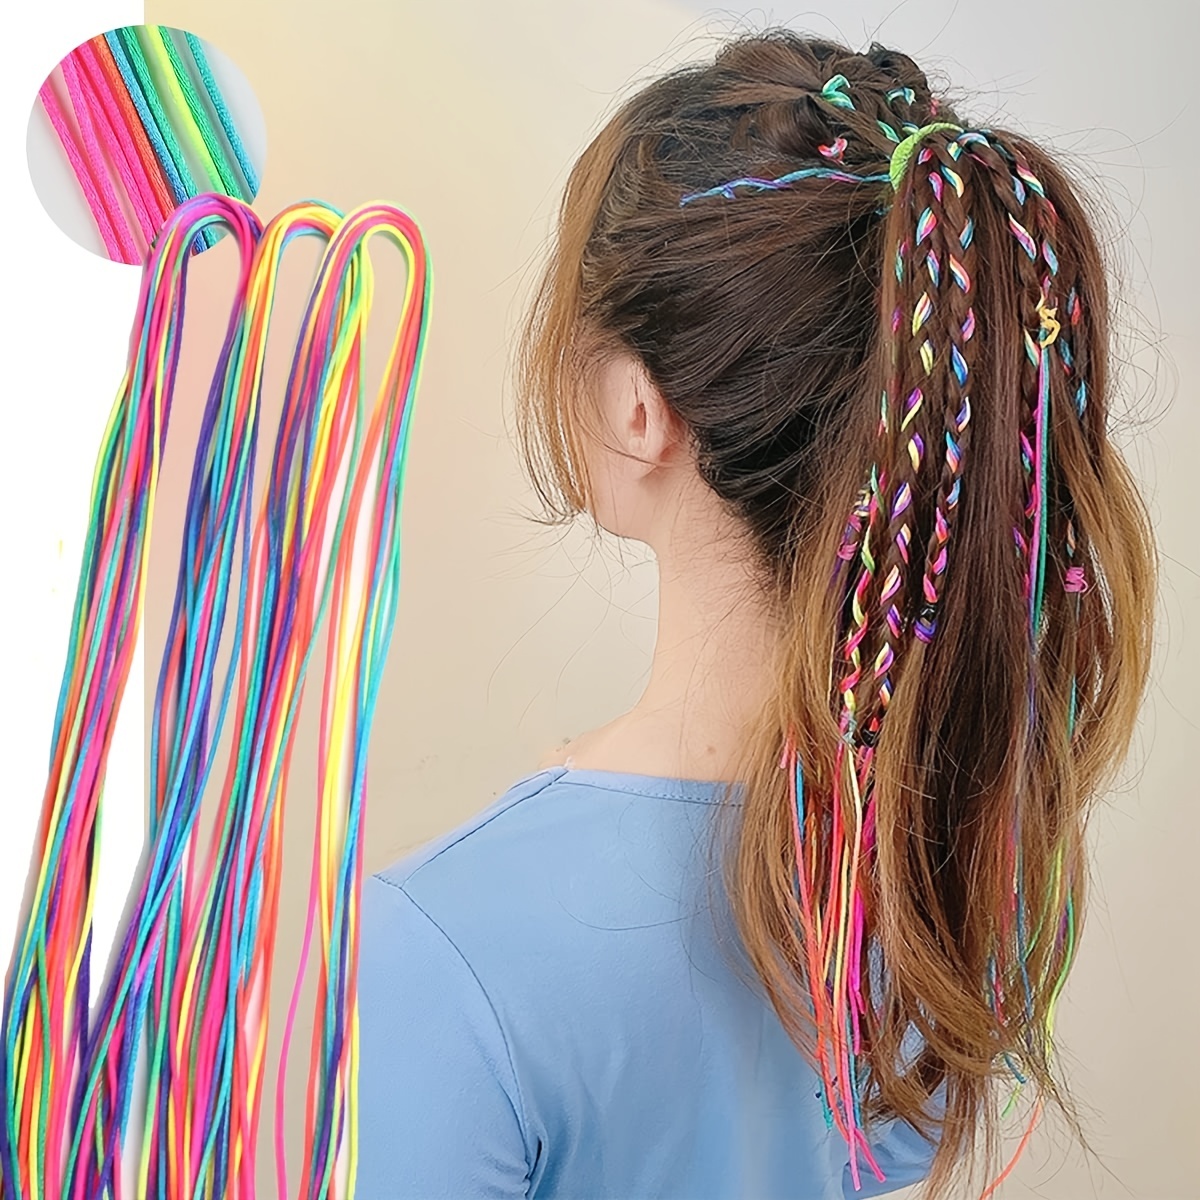 1512Pcs Hair Rubber Bands with Hair Loop Styling Tool Colorful Small Hair  Elastics with Hair Tie Cutter Topsy Pony Tail Hair Tool Hair Braiding Tools  for Girls Kids Hair Styling Accessories